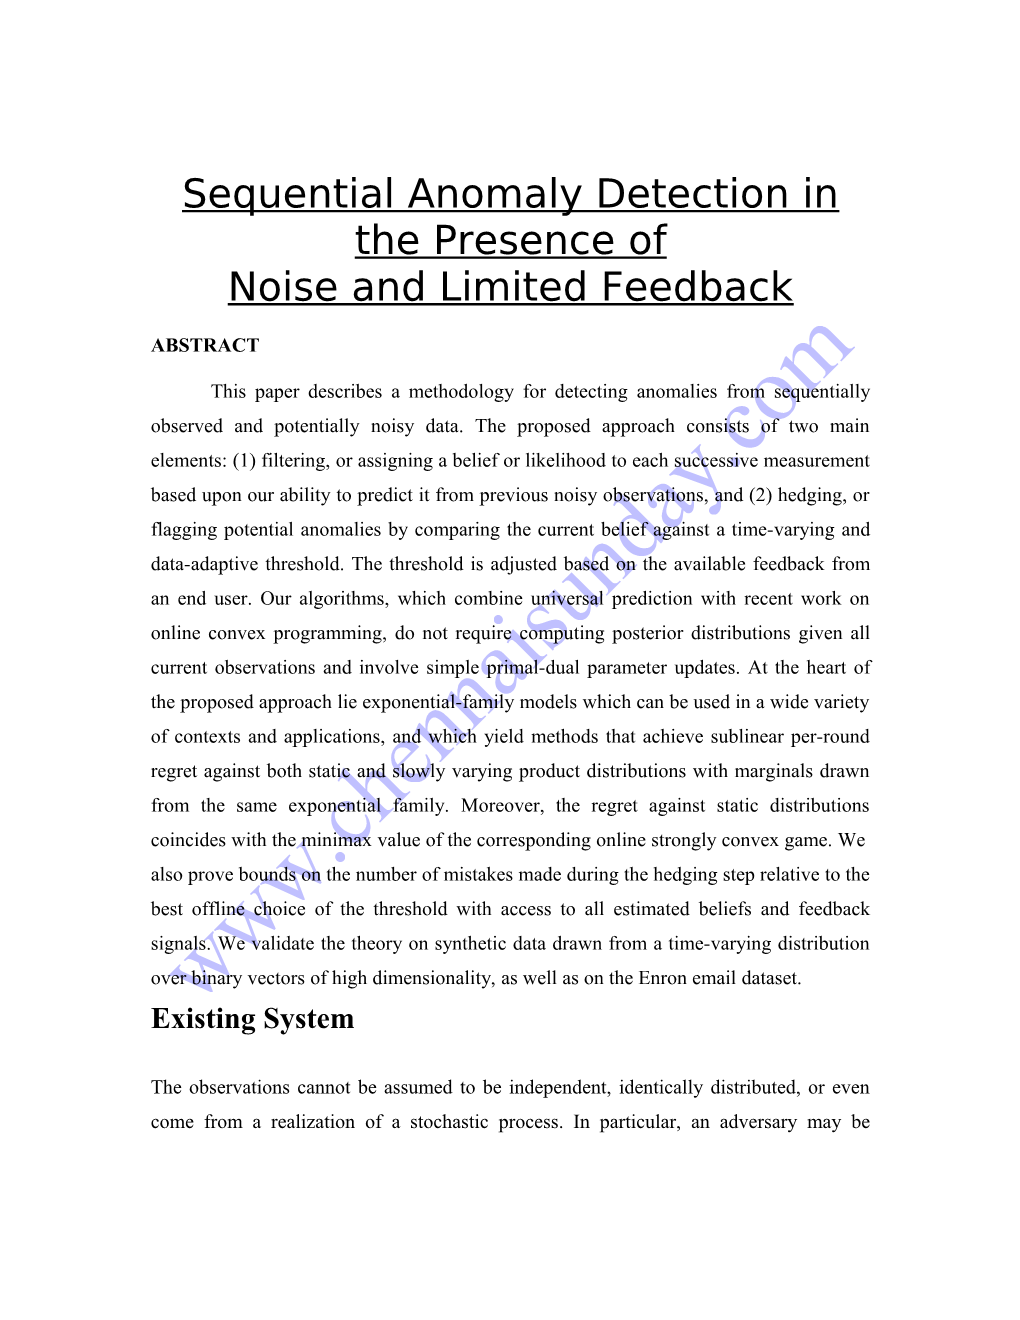 Sequential Anomaly Detection in the Presence Of